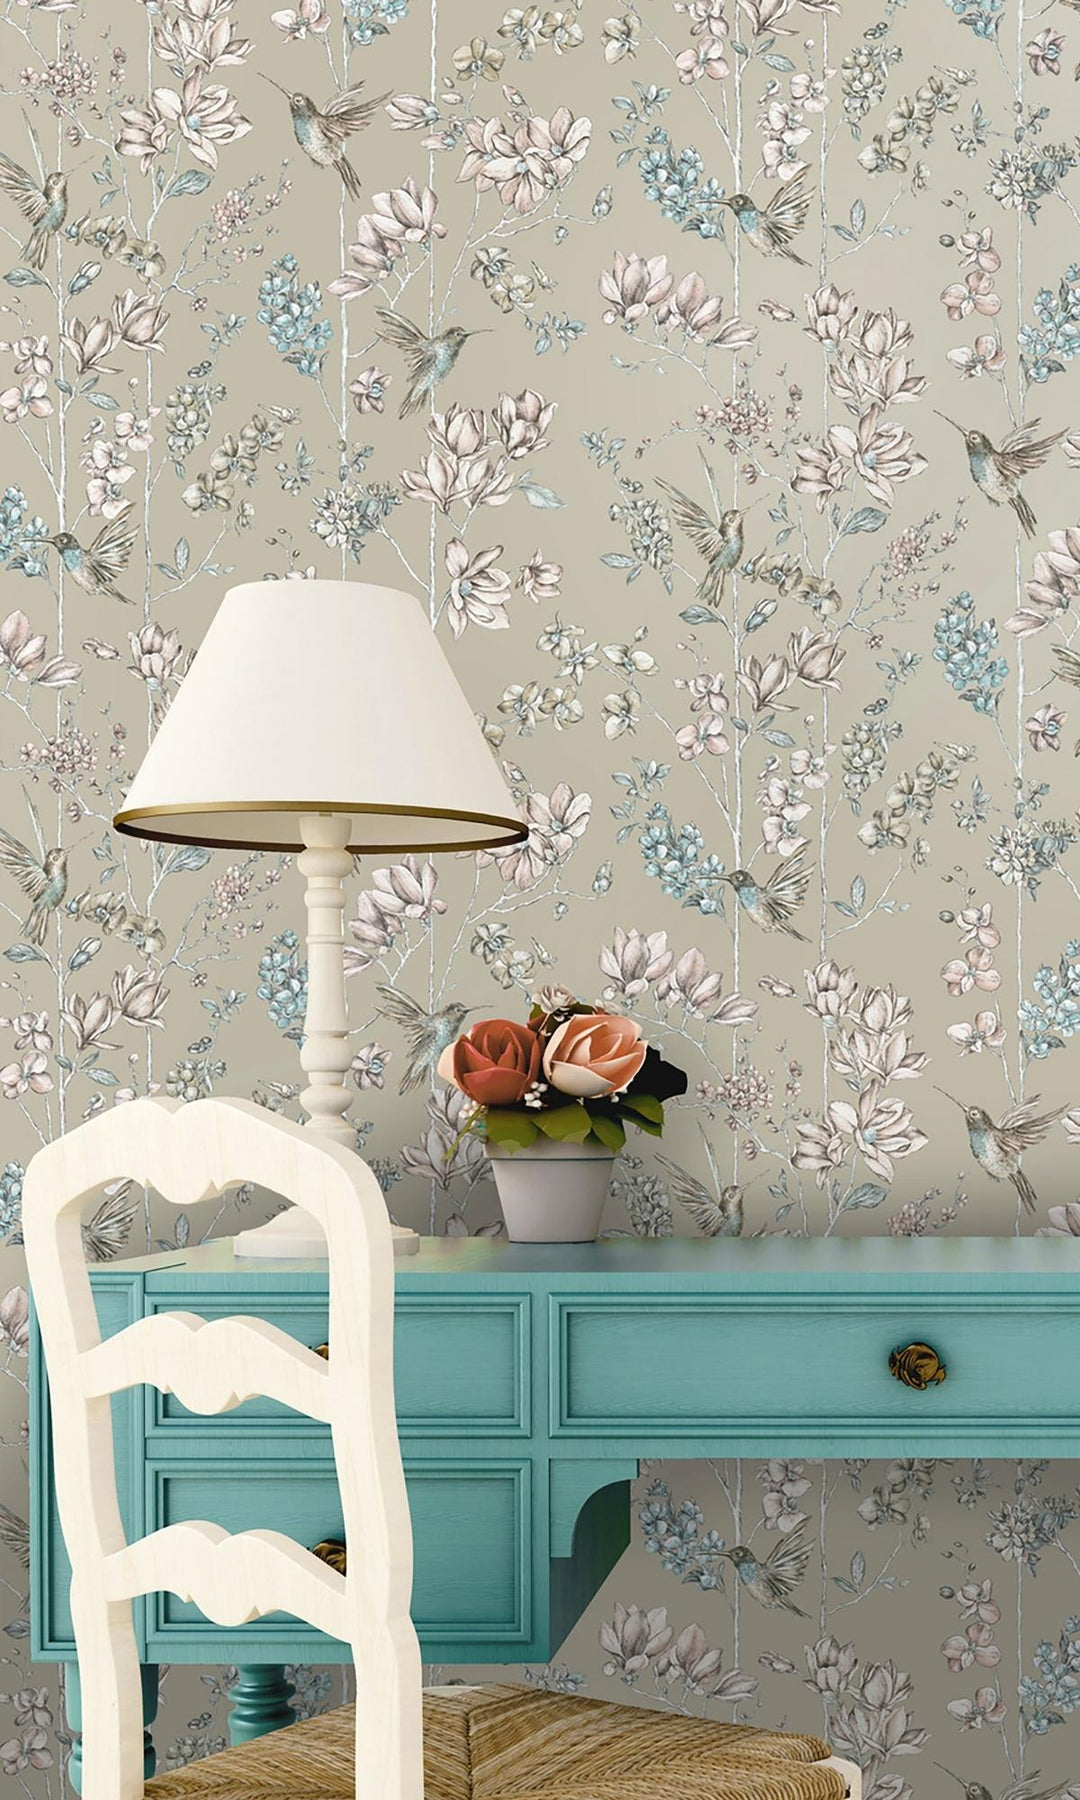 Shop Painted Flowers and Hummingbirds Charm Gilver Floral Wallpaper ...